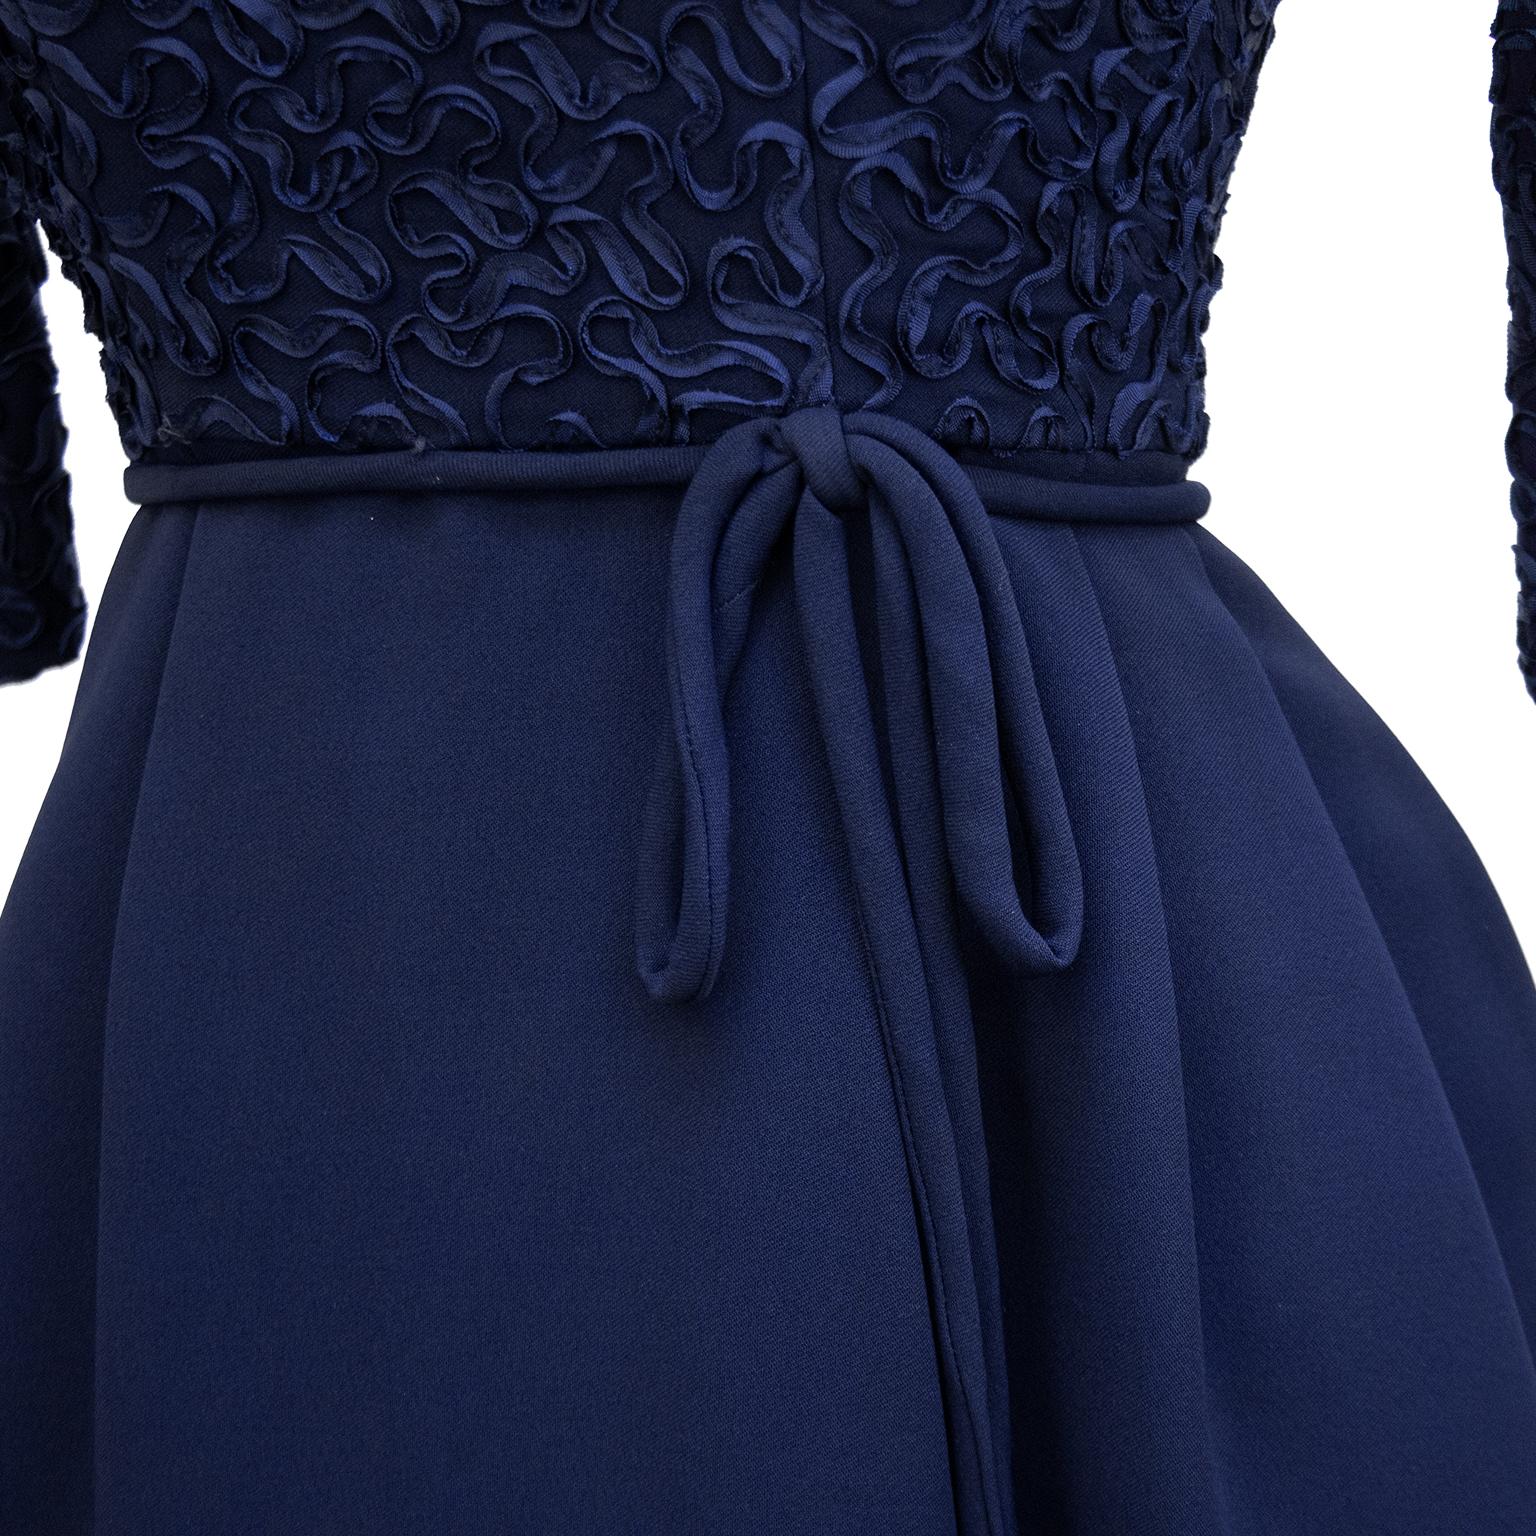 Black 1950s Navy Blue Cocktail Dress with Ribbon Embroidery 